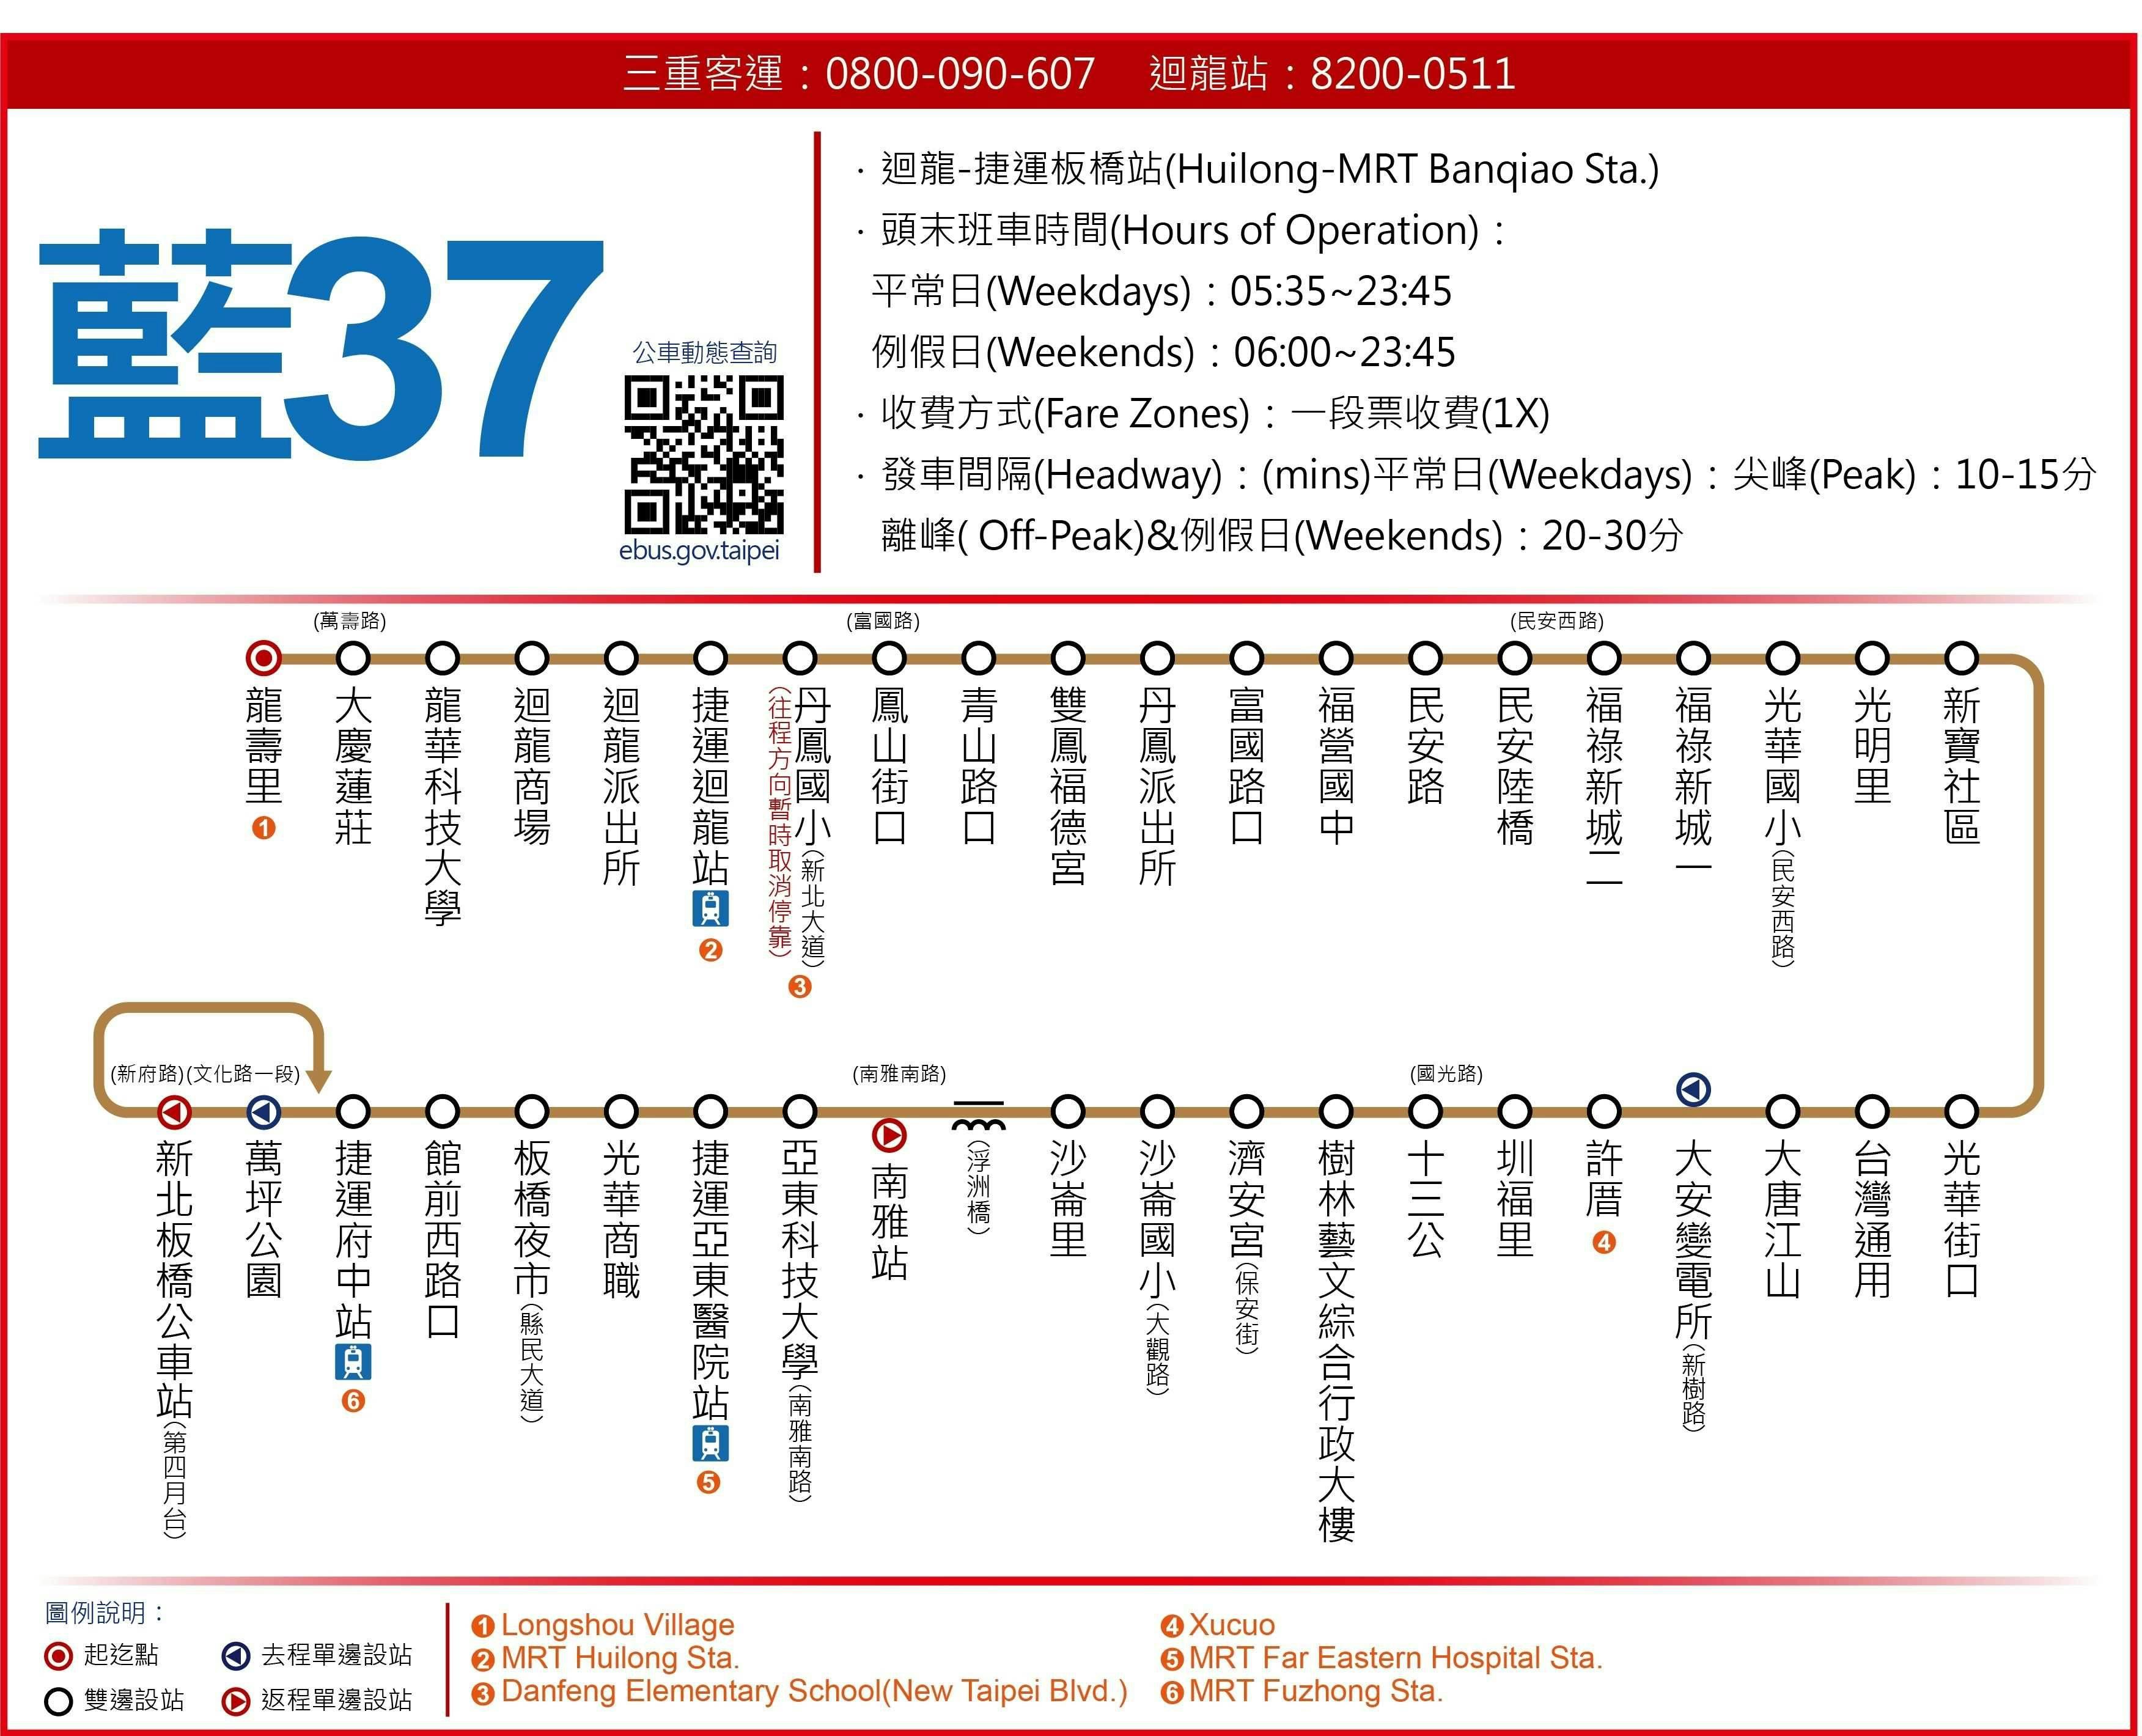 BL37Route Map-新北市 Bus